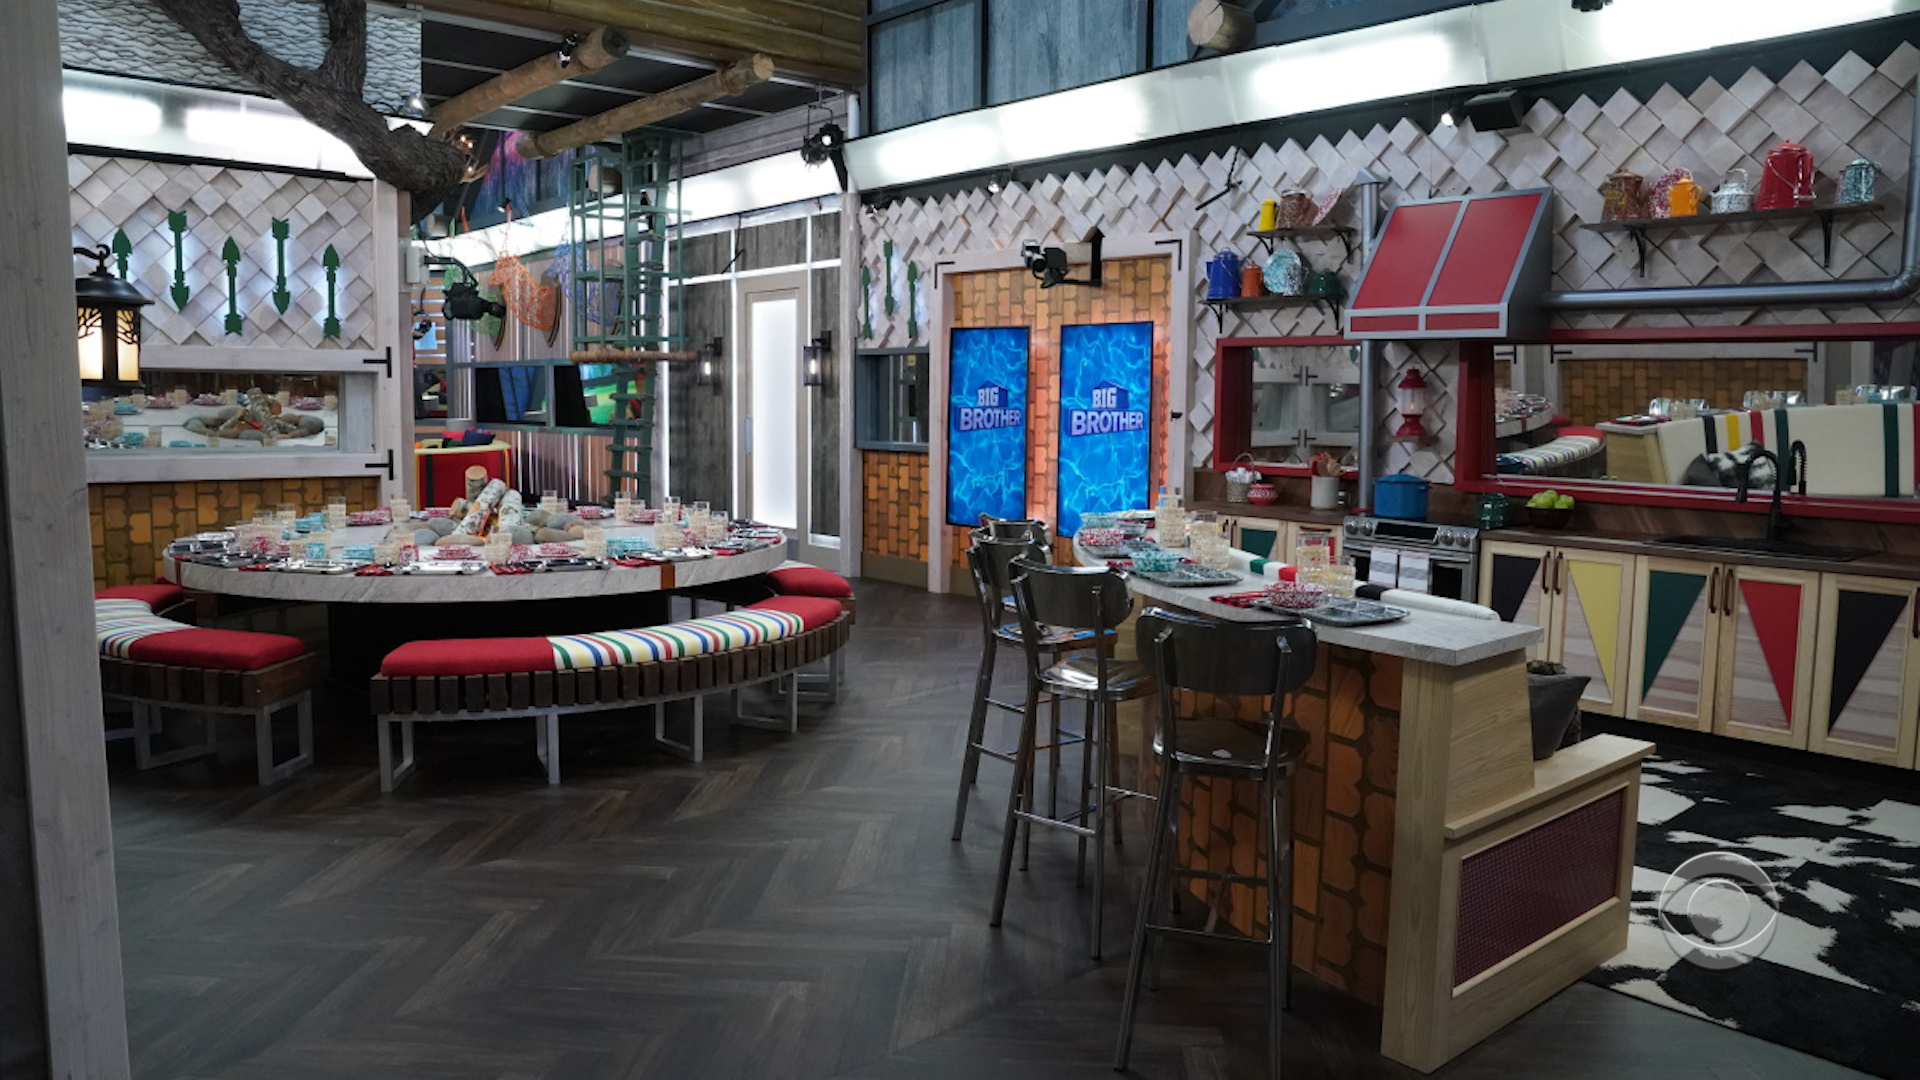 Big Brother 4 - Kitchen and living area